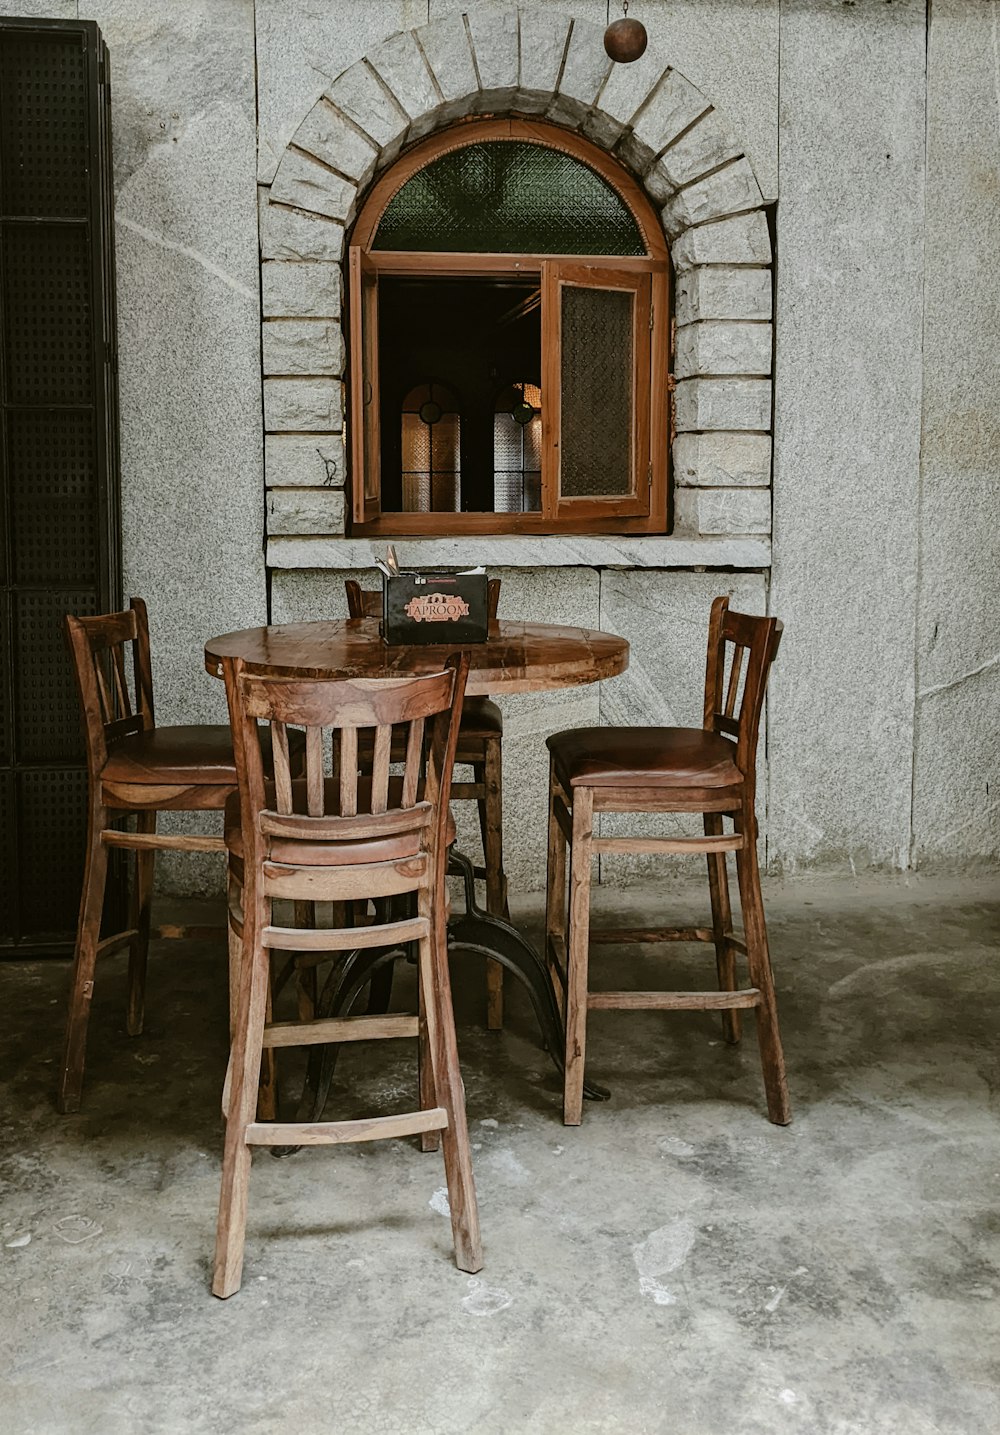 a table and chairs in front of a window